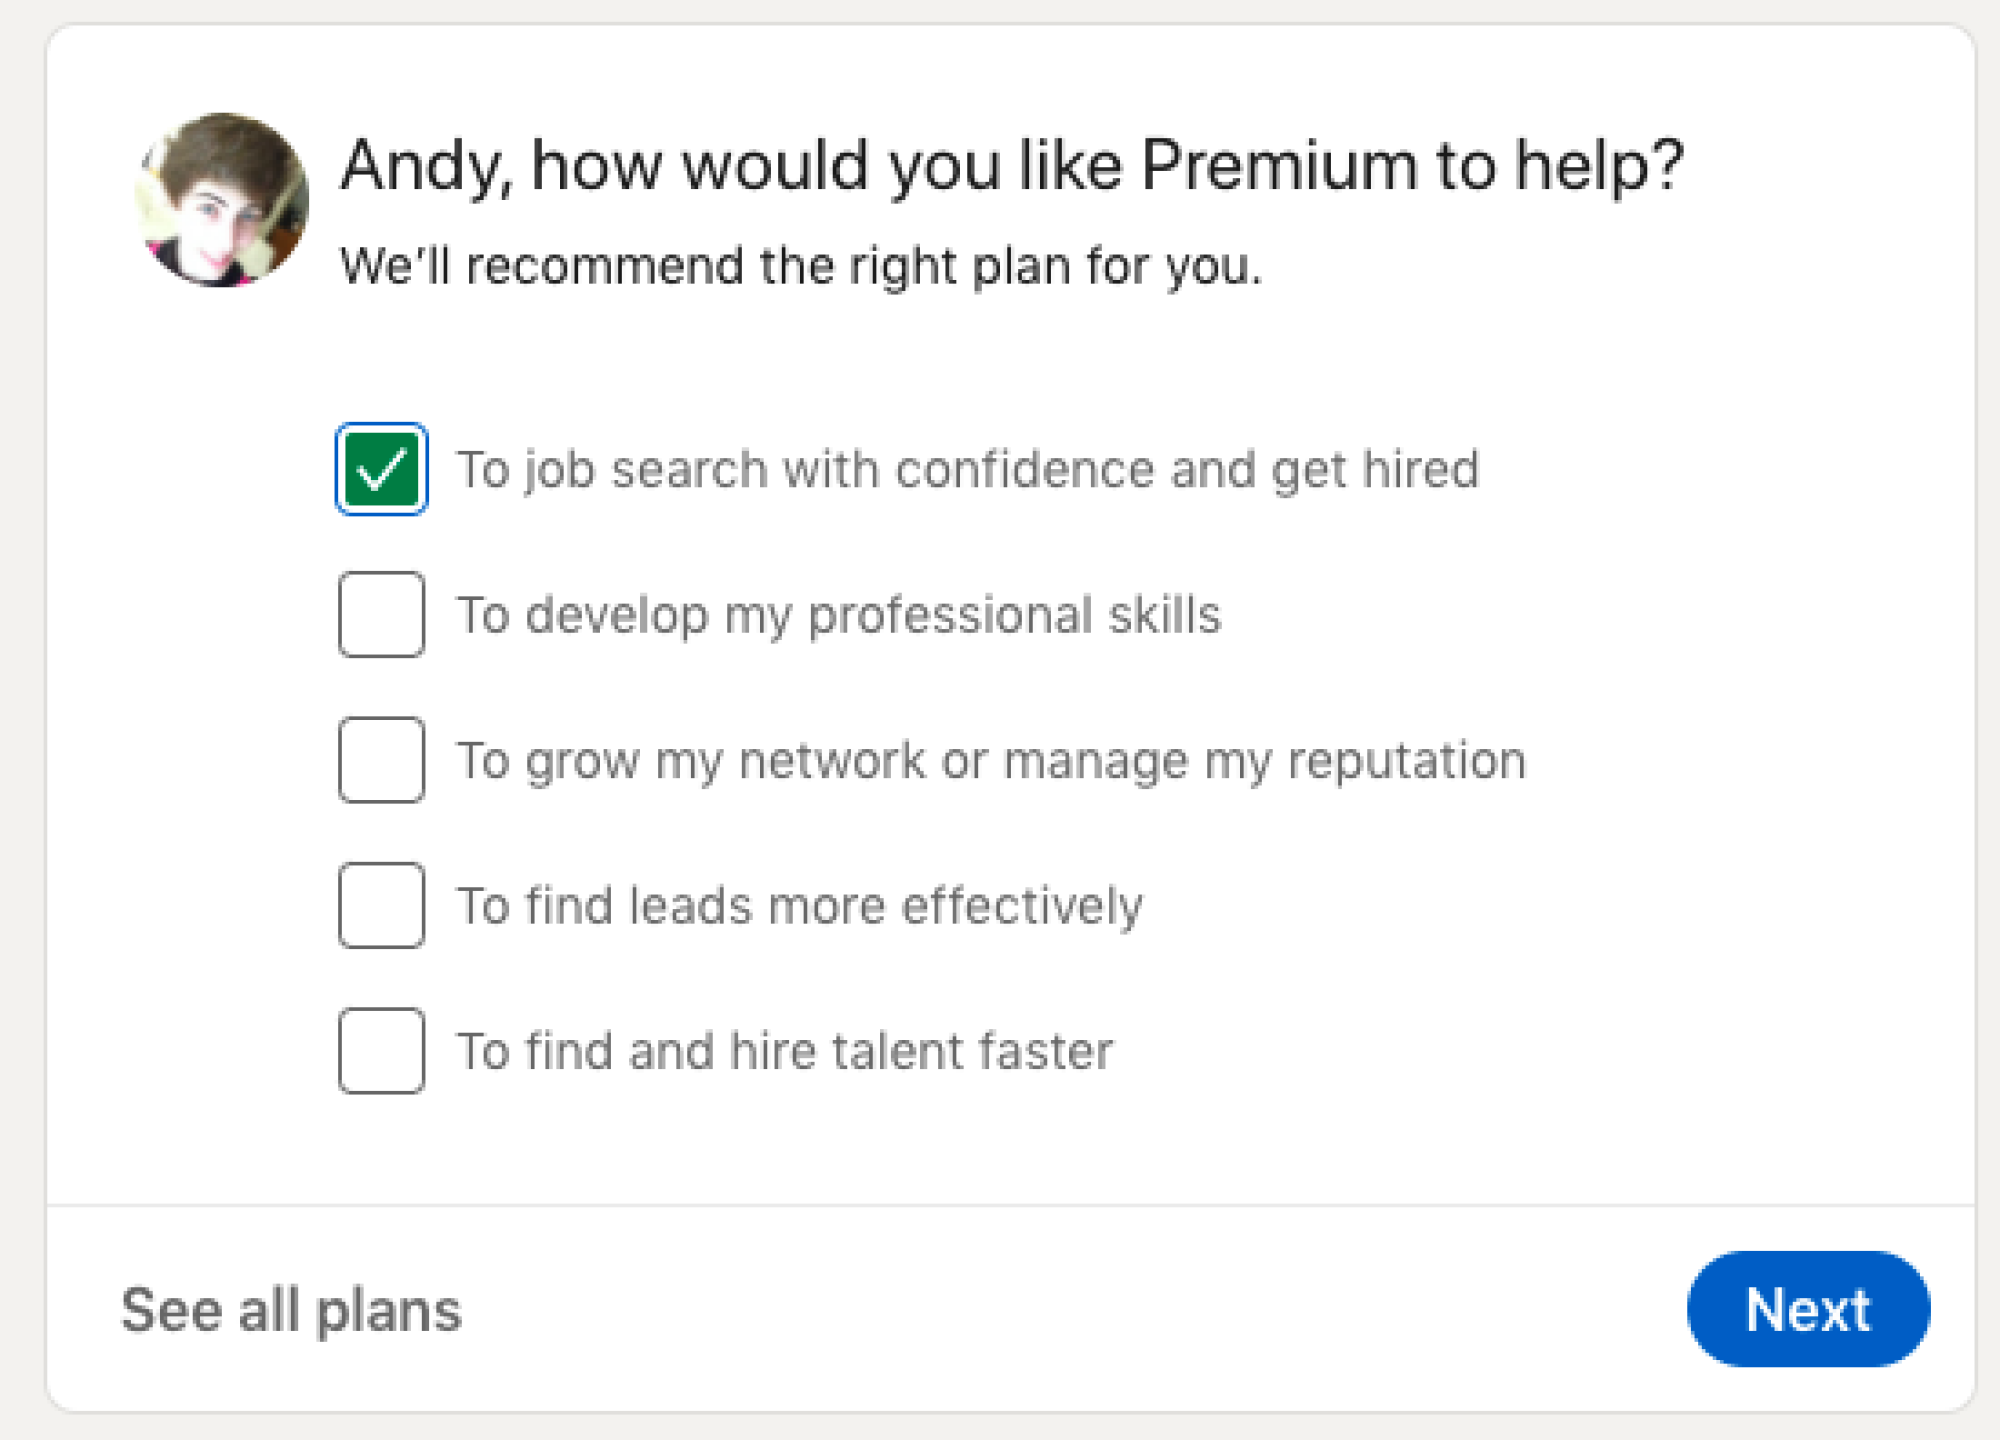 A screenshot of LinkedIn showing the option to "see all plans".